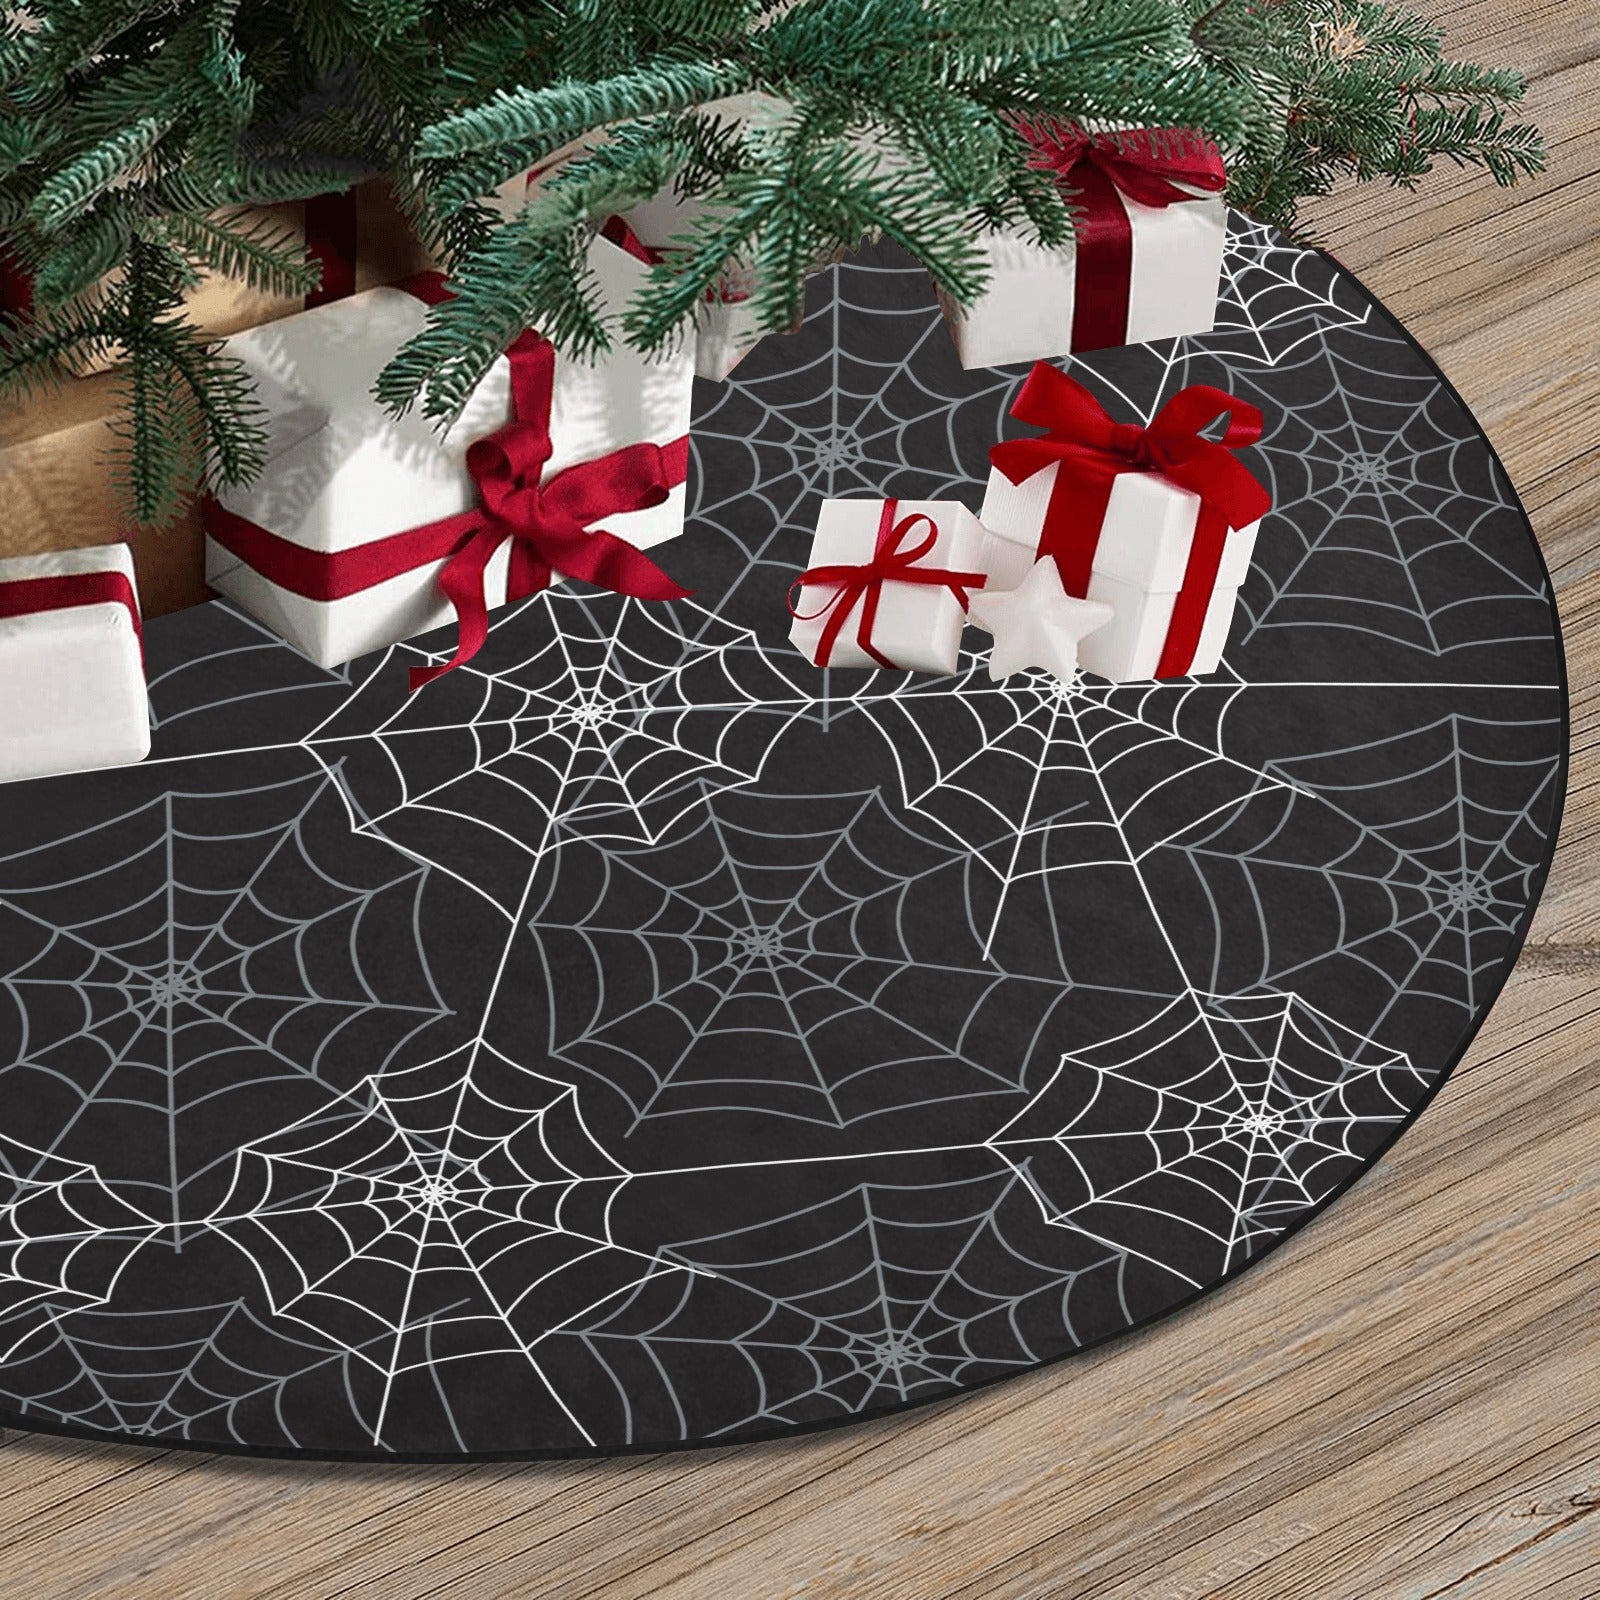 Spiderweb Halloween Tree Skirt, Black Goth Vampire Christmas Stand Base Cover Home Decor Decoration All Hallows Eve Creepy Spooky Party Starcove Fashion